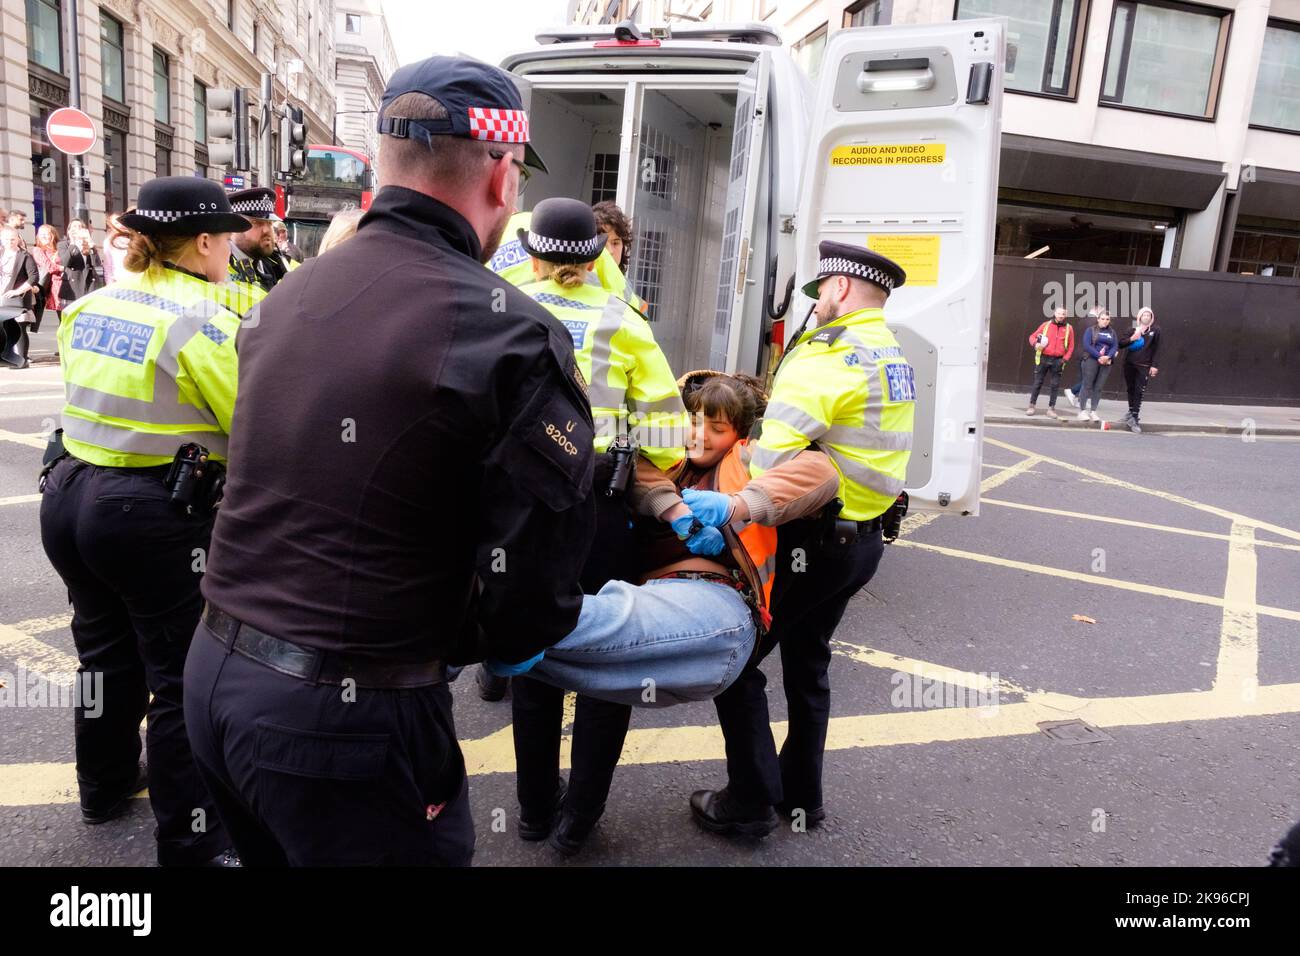 London, UK. 26 OCT 2022. Just Stop Oil activists block Piccadilly rd. by green park tube station. Angry drivers dragged some of the protesters and the pollice arrested them. Stock Photo